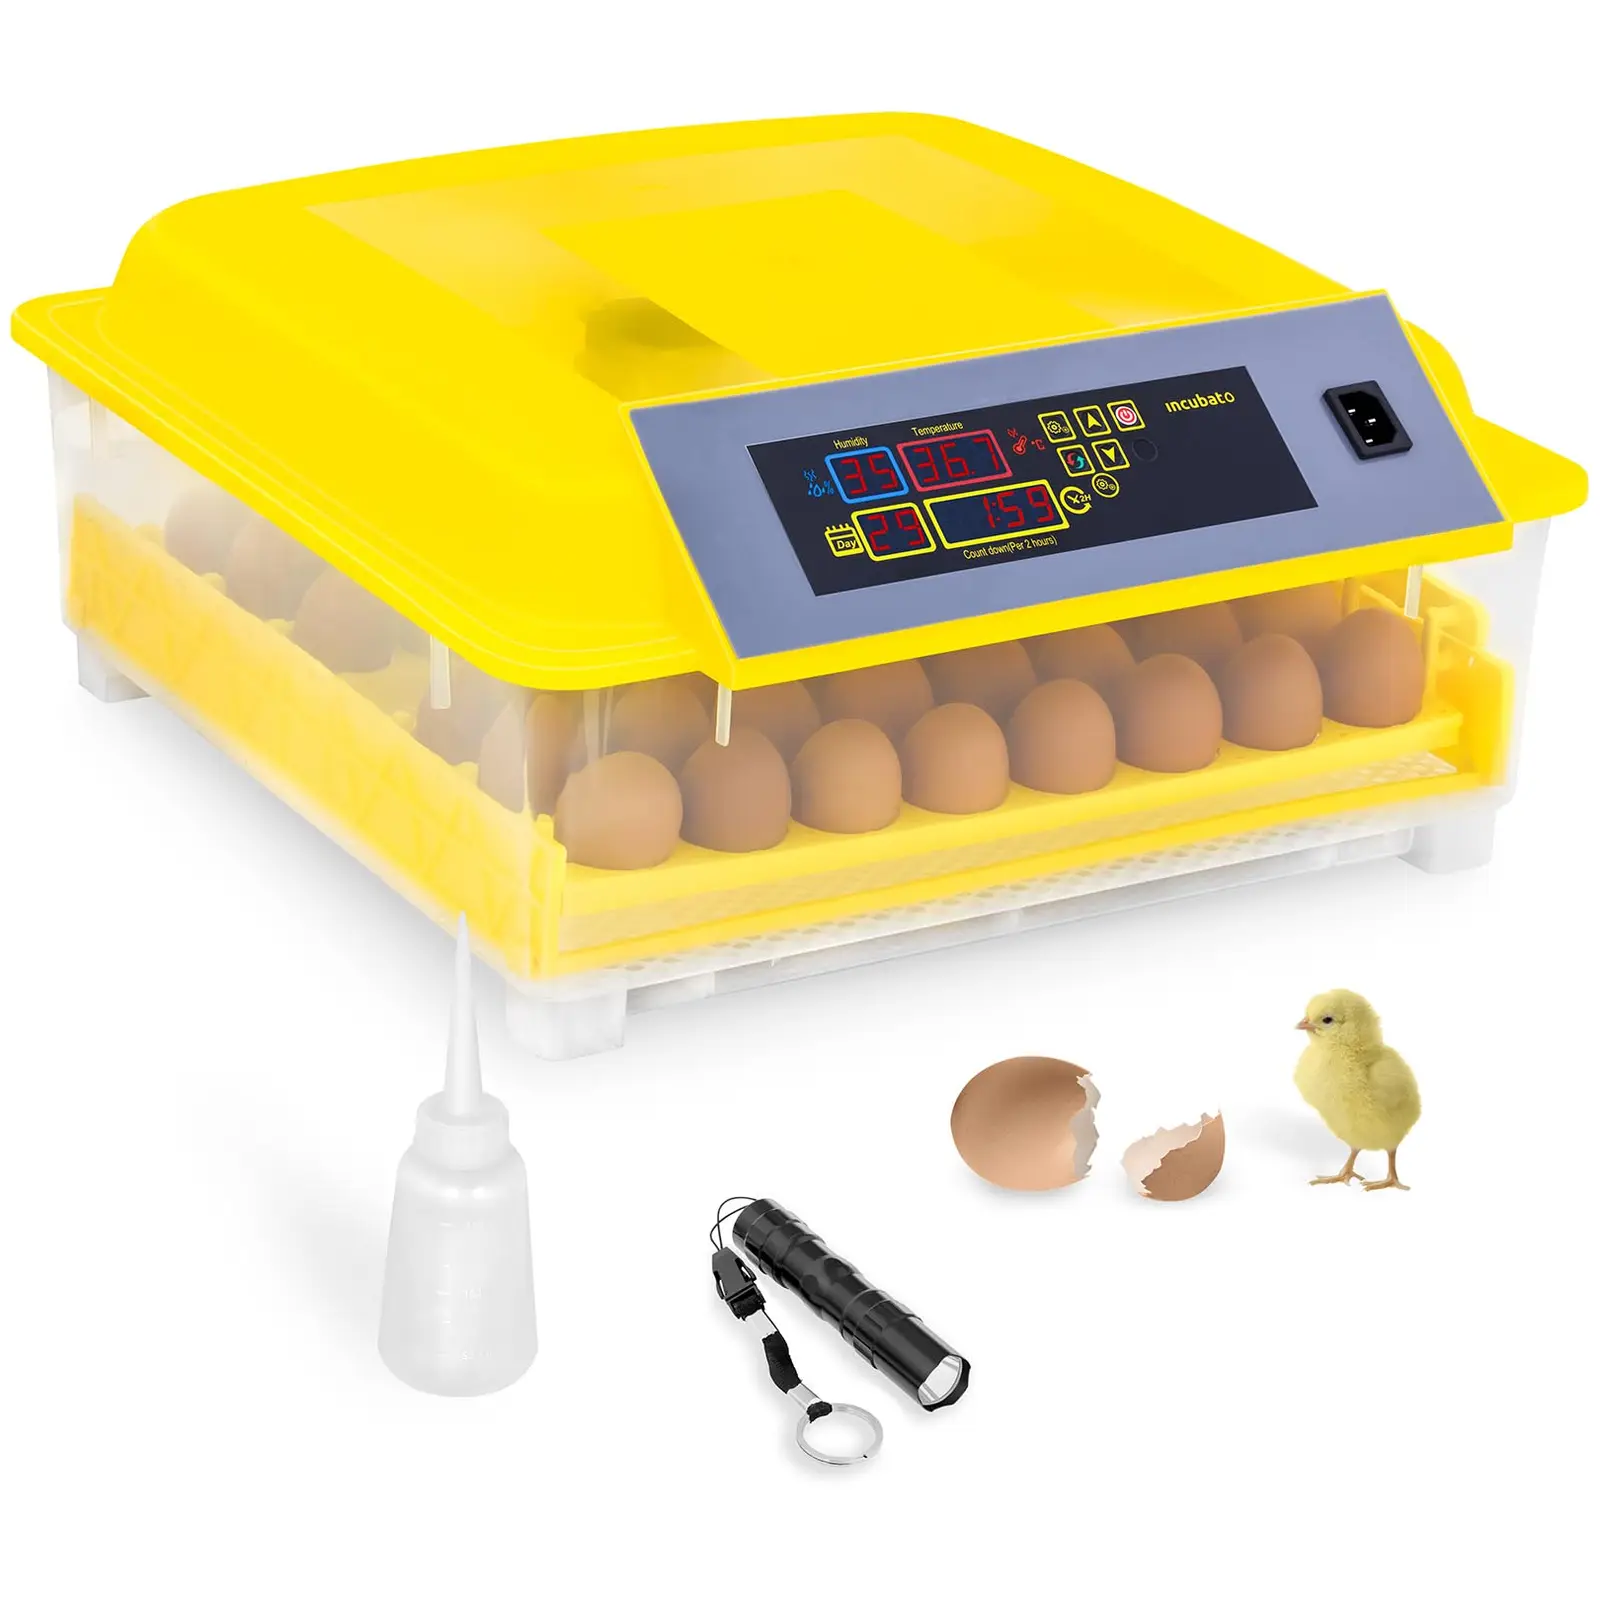 42-Egg Incubator Practical Fully Automatic Poultry Incubator with Egg  Candler US in Stock Fast Shipping 